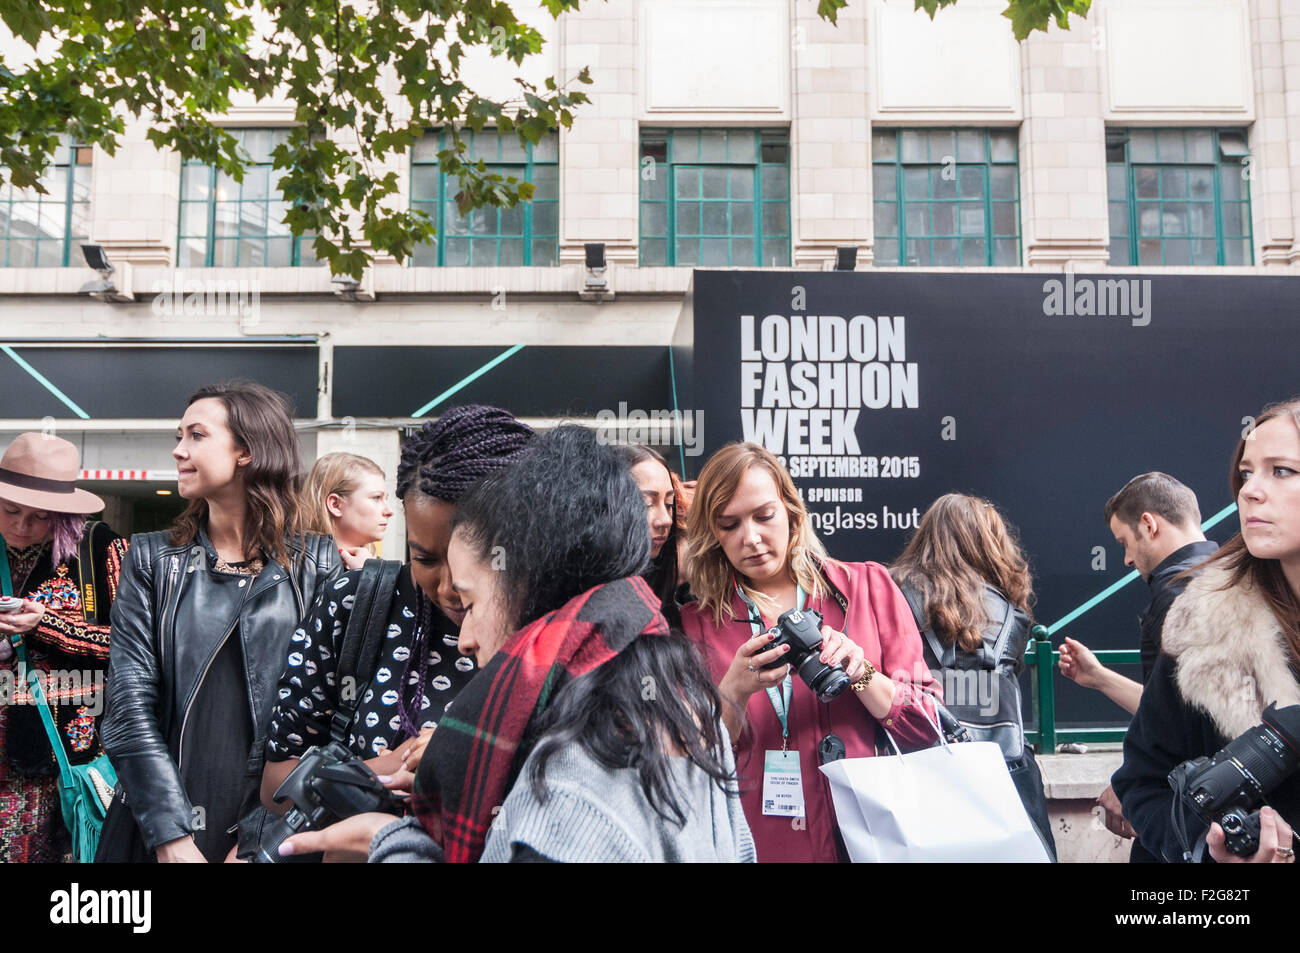 London, UK. 18 September 2015.  Fashionistas and followers of fashion gather at the new venue of Brewer Street Car Park in Soho for the launch of London Fashion Week.  Heavy rain showers did little to dampen their excitement. Credit:  Stephen Chung / Alamy Live News Stock Photo